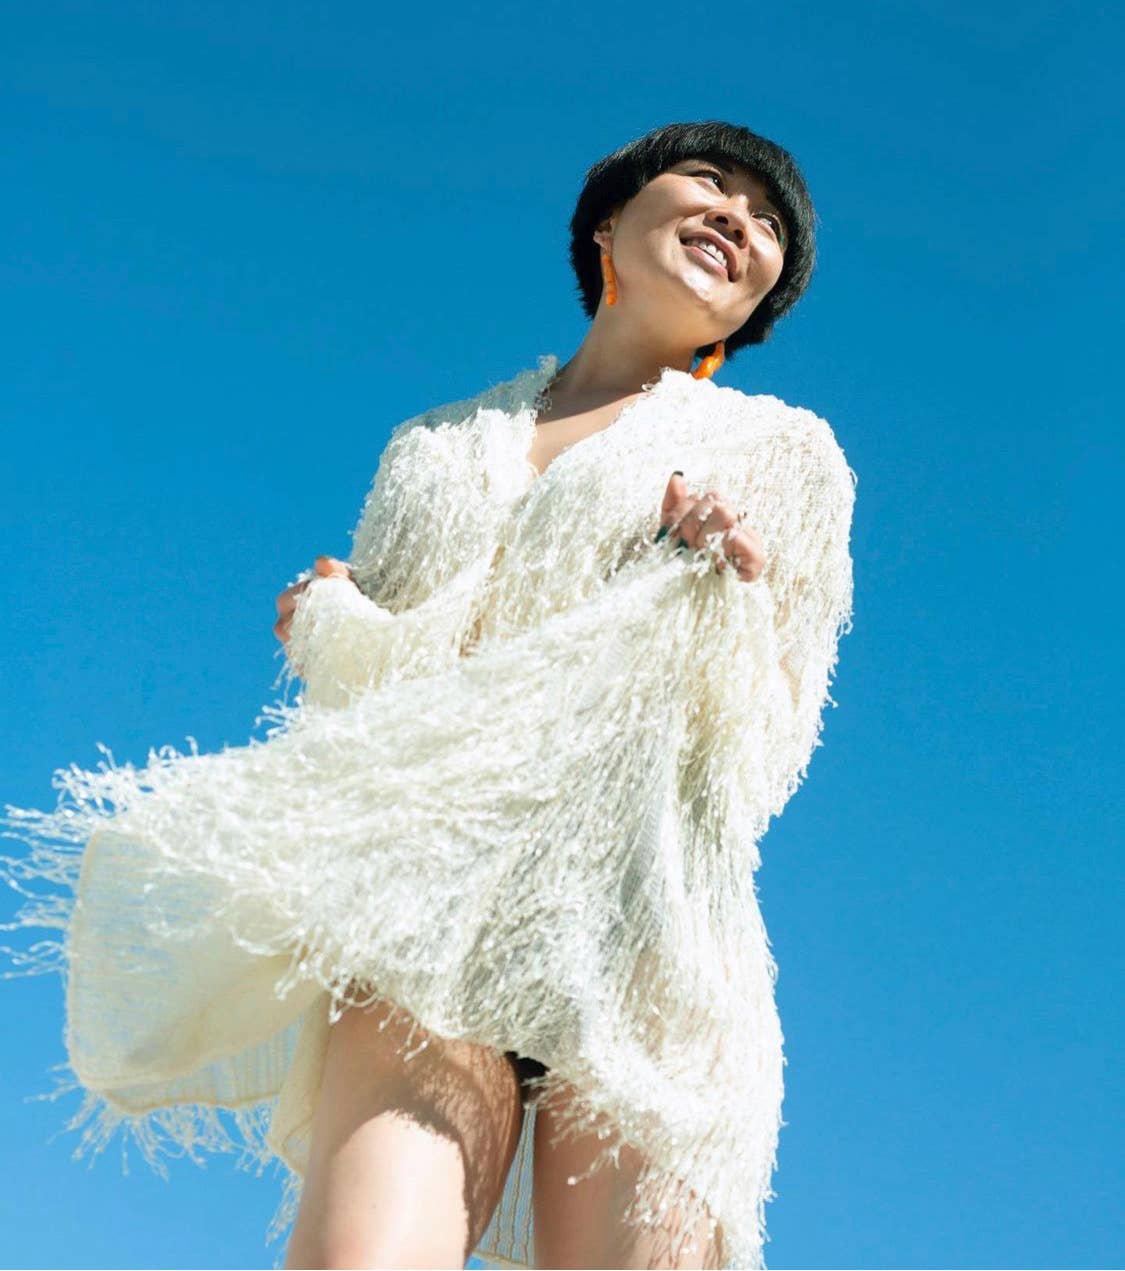 Editorial style photograph of woman wearing the pair of regular cheeto earrings. Woman is wearing a white, fringey dress set against the blue sky